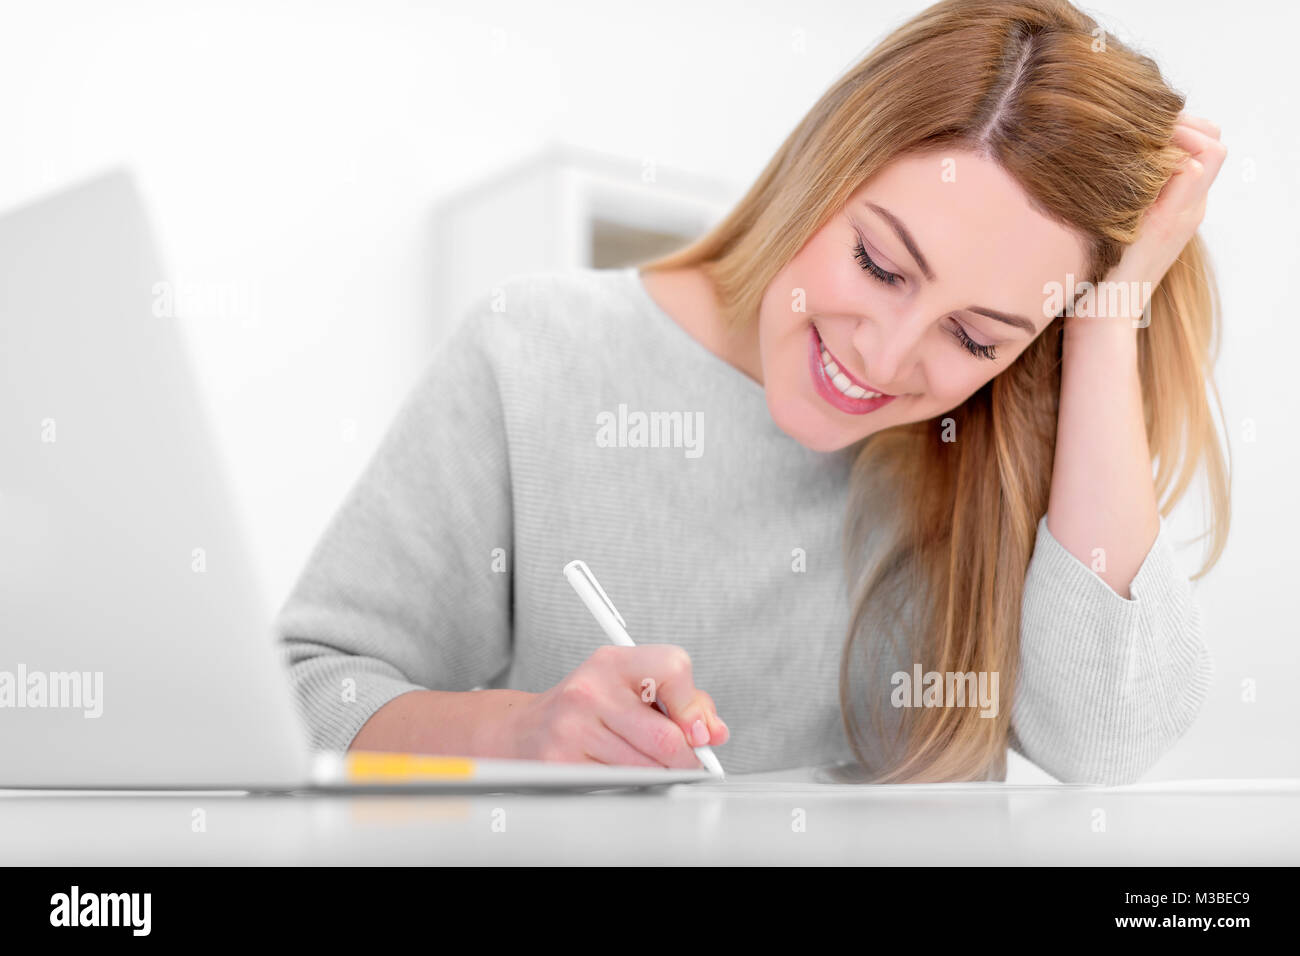 Attractive young woman in a good mood works with documents in the office or at home. Writes, fills papers at the desk with a laptop. Stock Photo